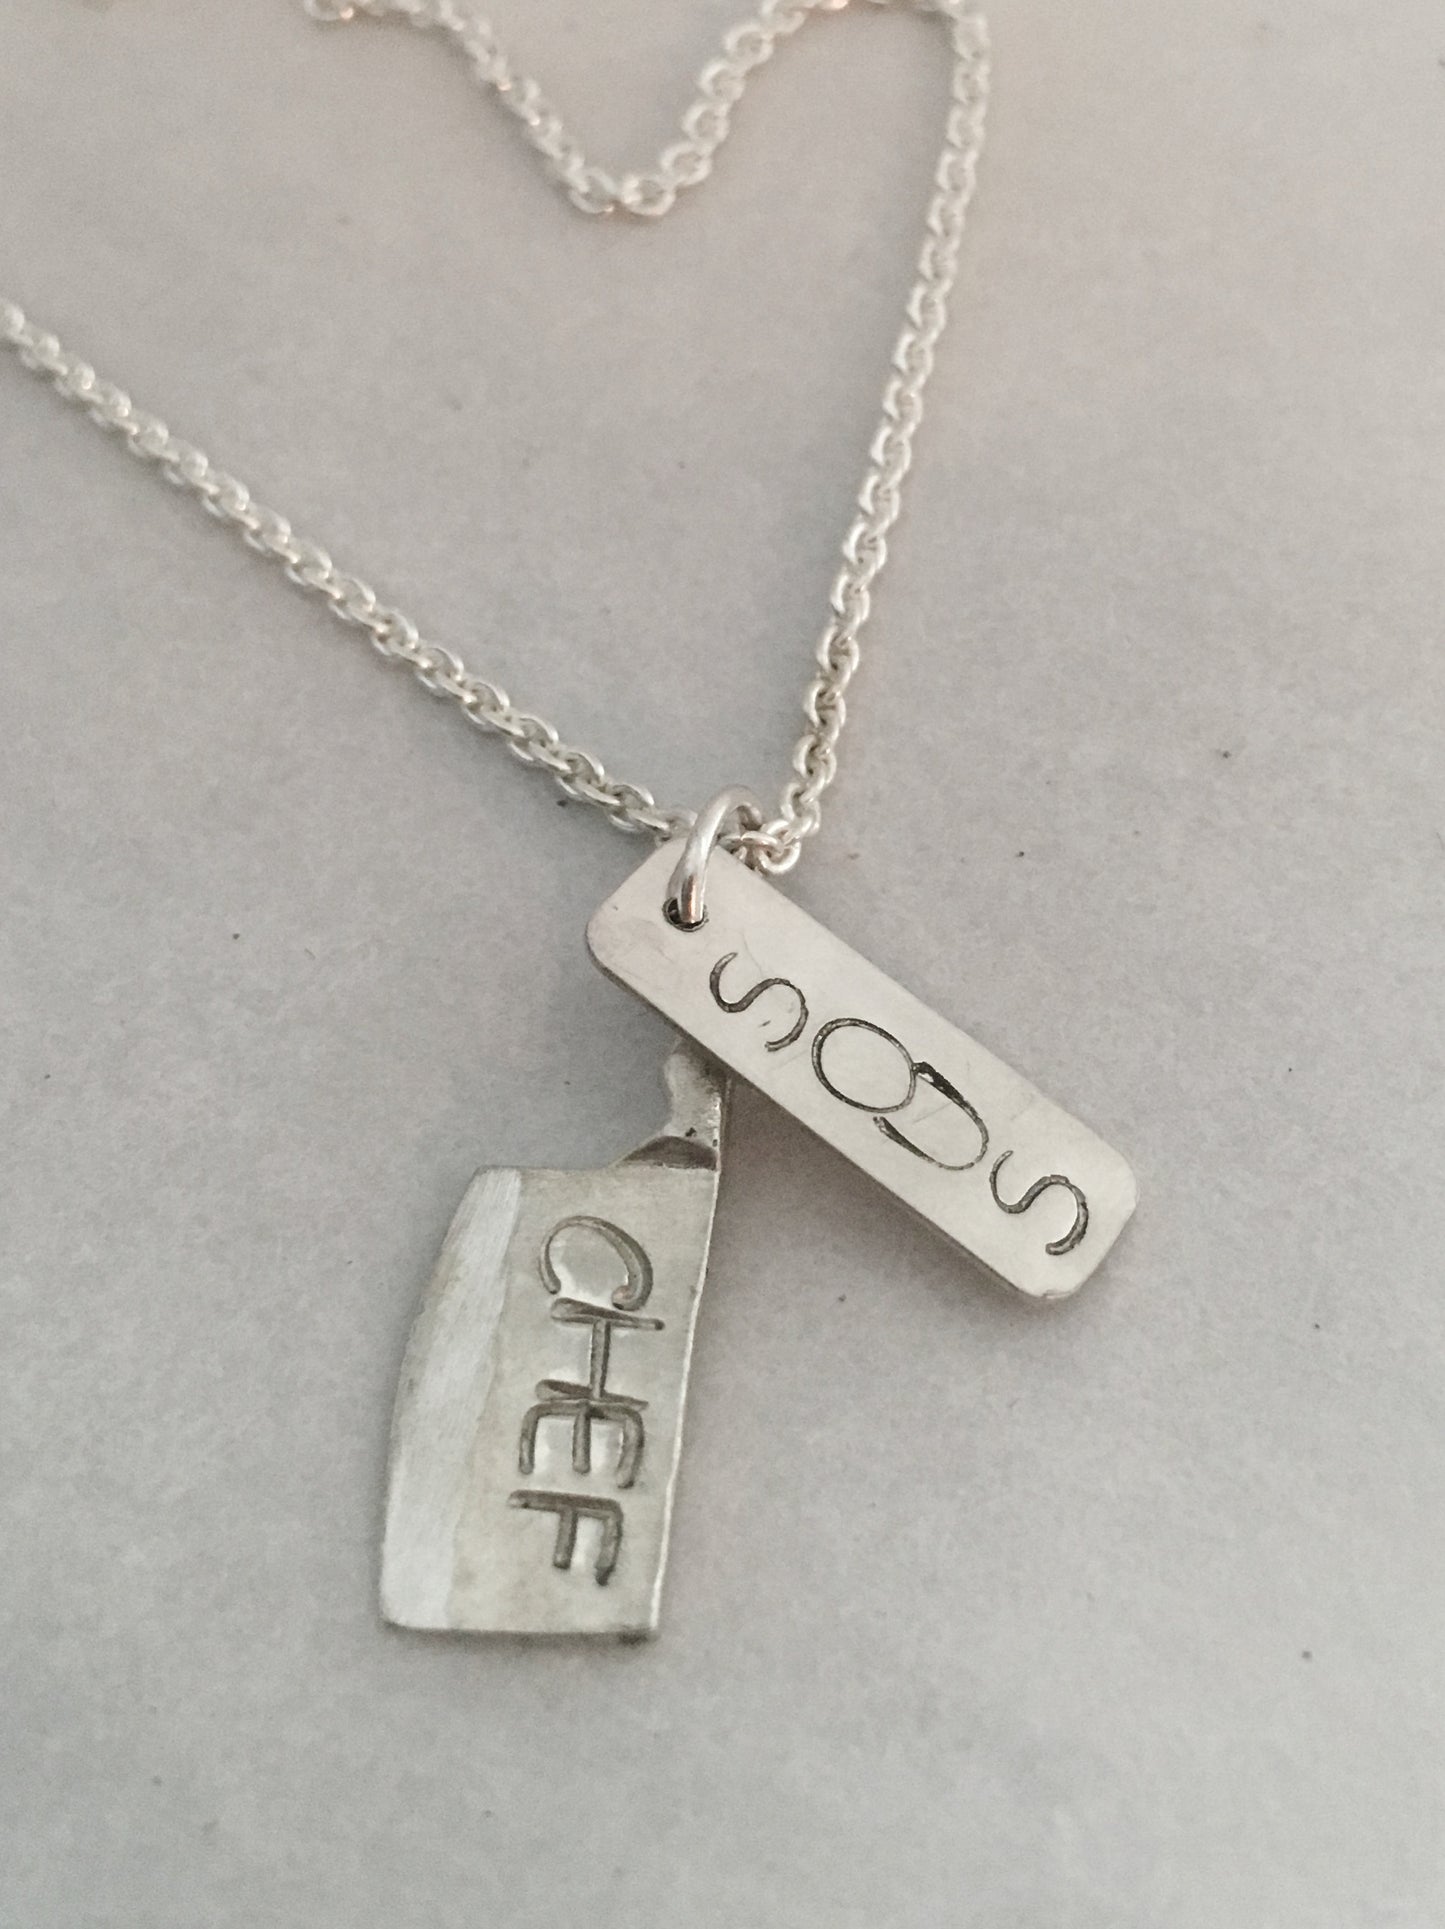 Hand Stamped Sous Chef Knife and Dog Tag Pendant Necklace